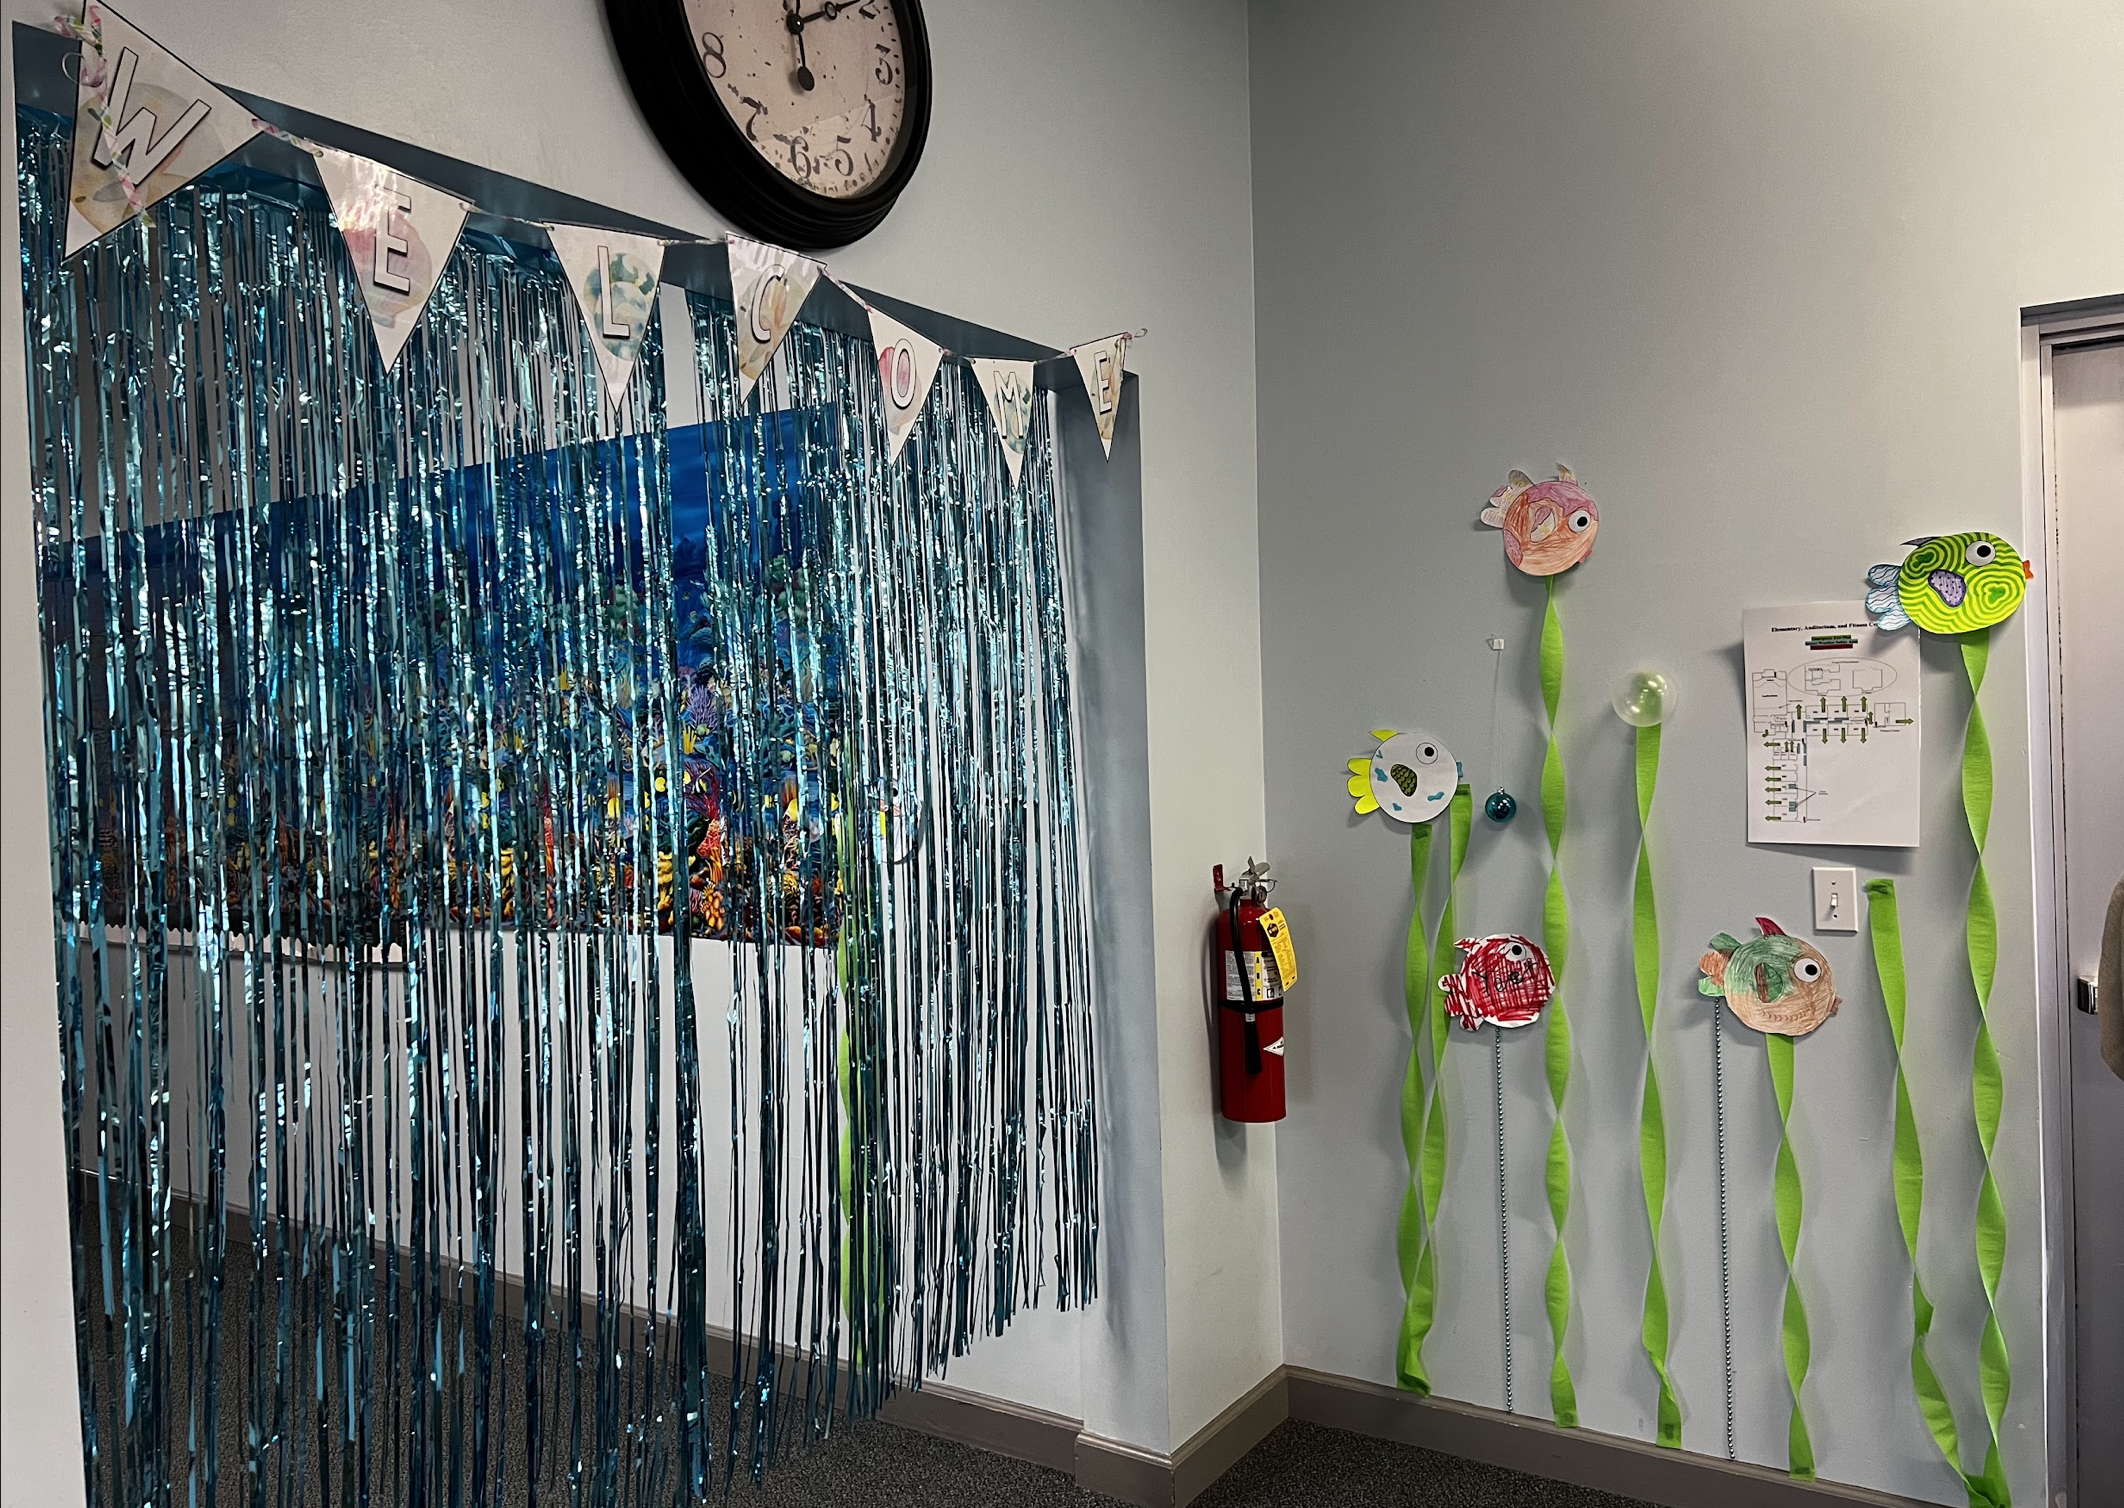 Our students decorated the fish decorations